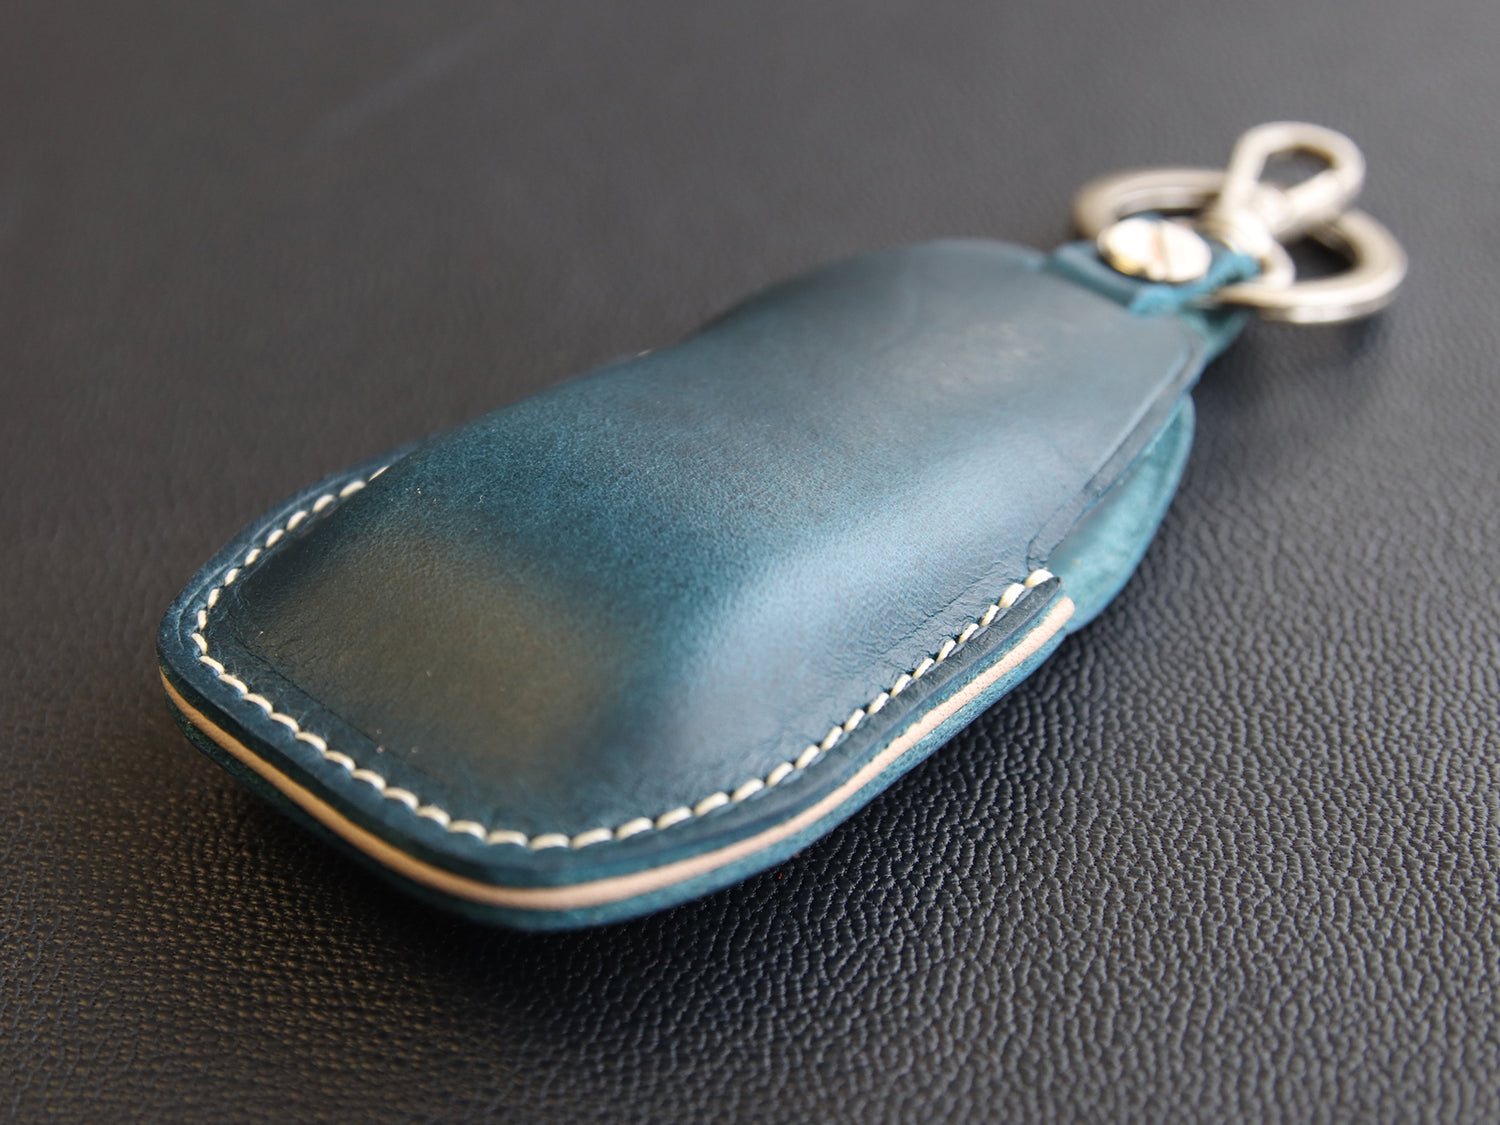 Mercedes Benz [2-3] Key Fob Leather Cover - E Class, S Class, W213, etc - Italian Veg-Tanned Leather